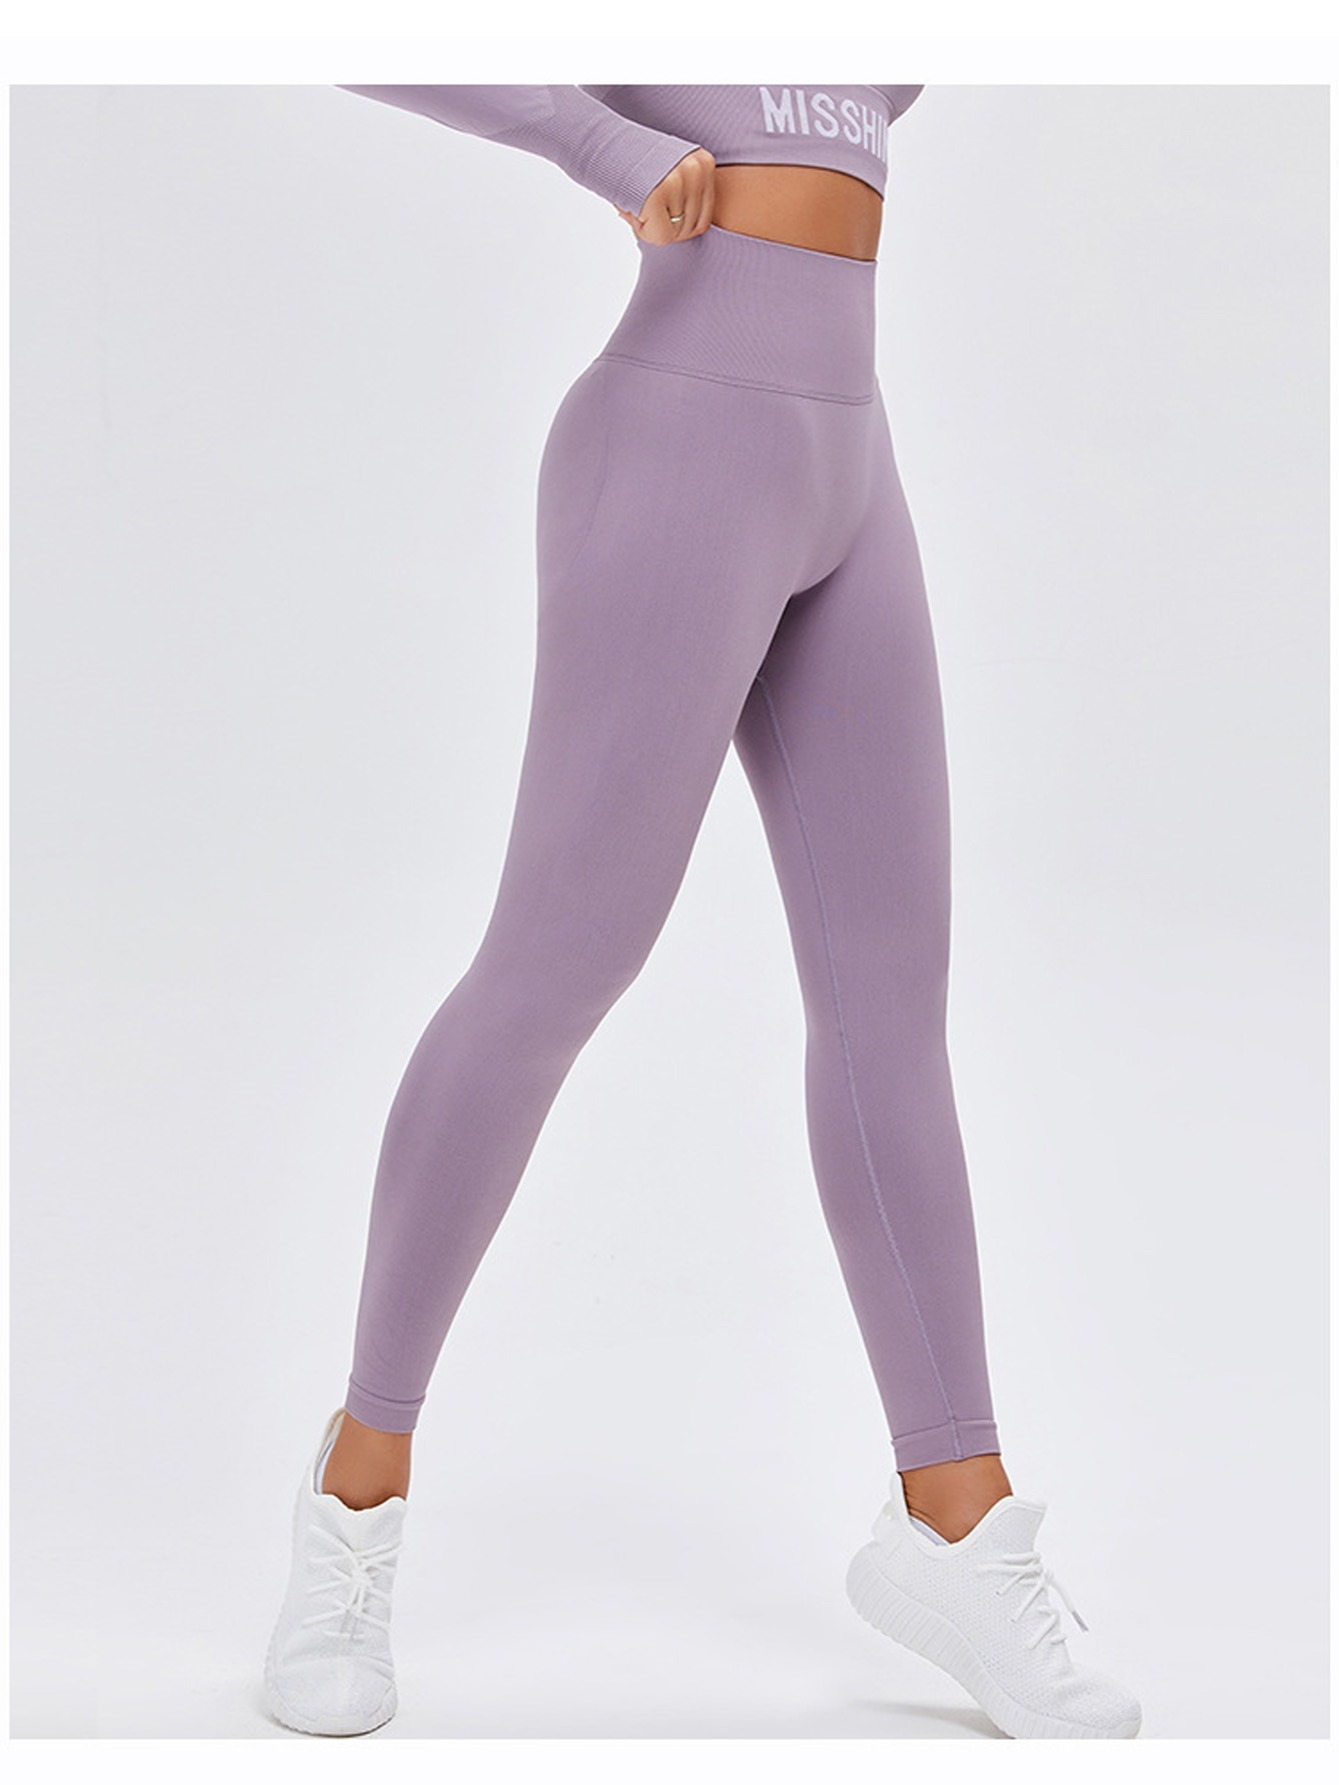 Solid Color Seamless Leggings High waisted Butt Lifting Yoga